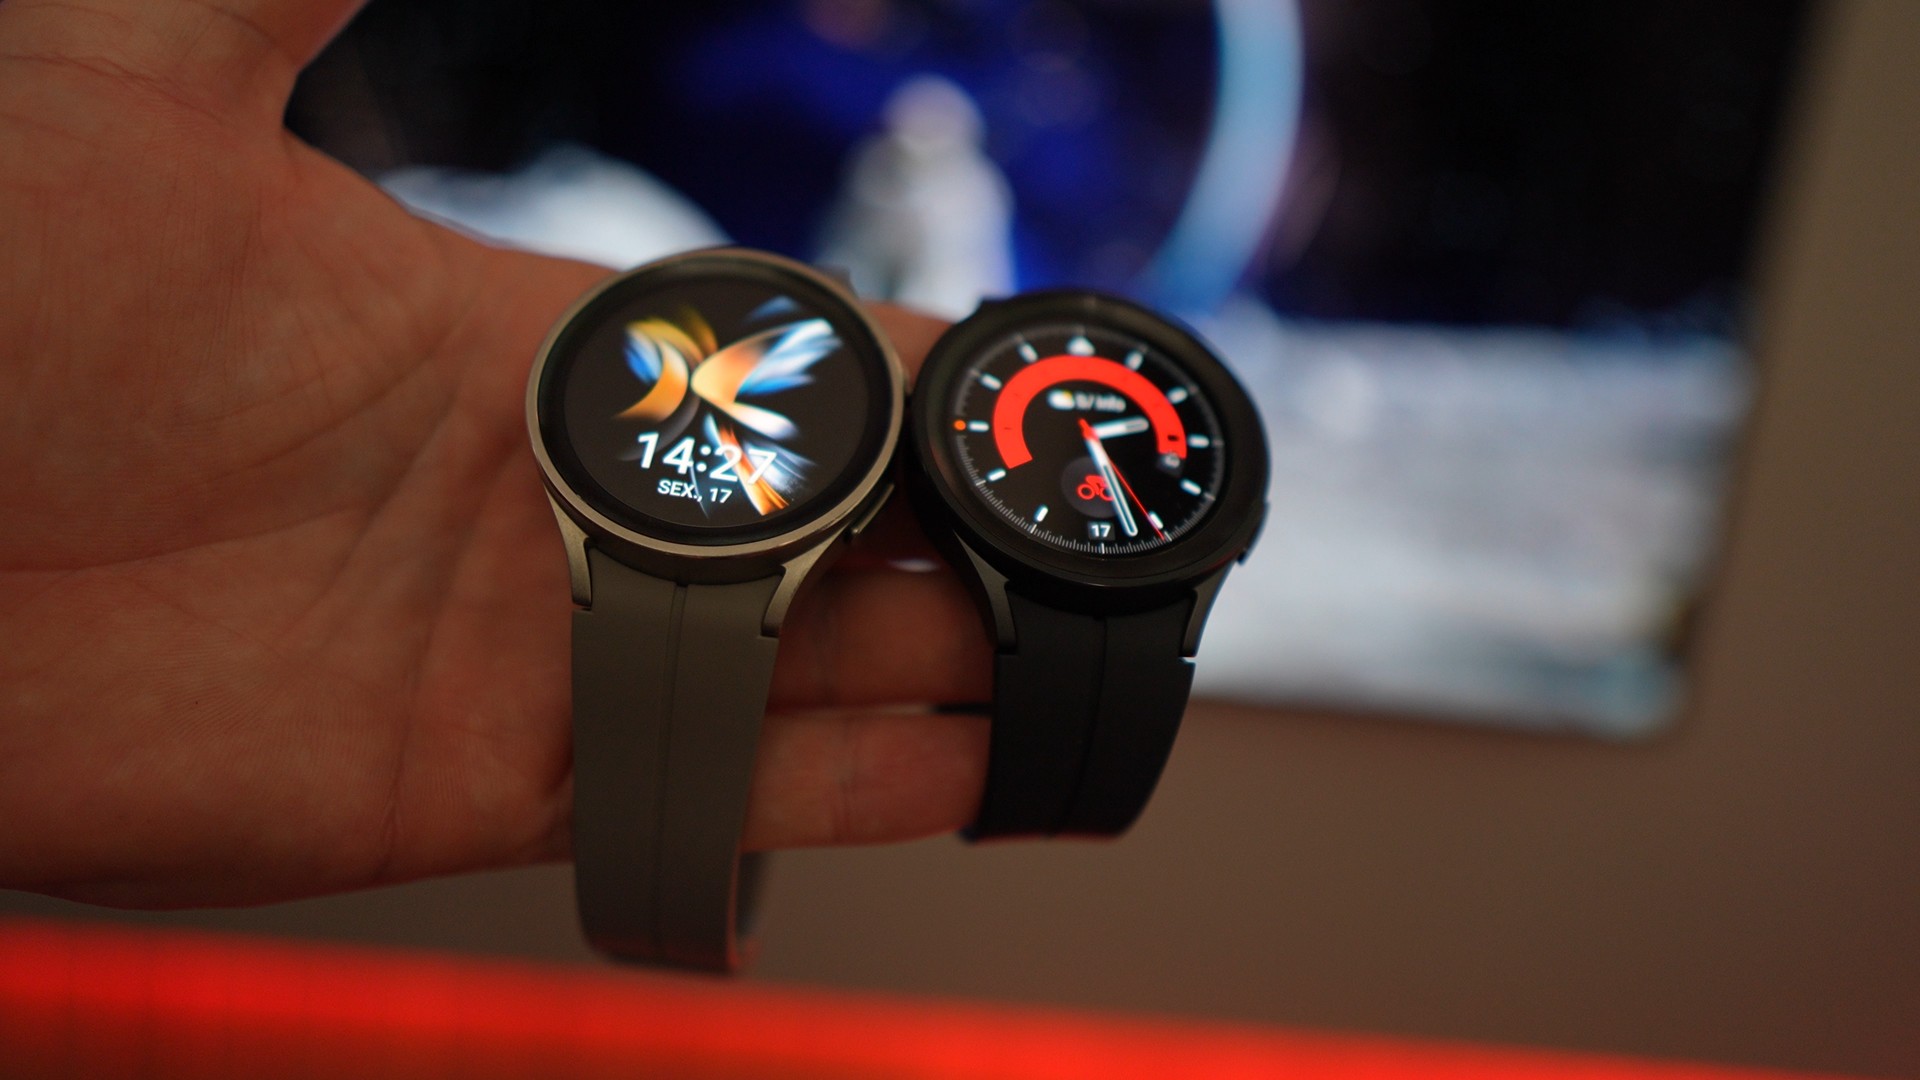 Samsung’s Galaxy Watch line addresses tattoo interference issues for heart rate and oxygen saturation monitoring